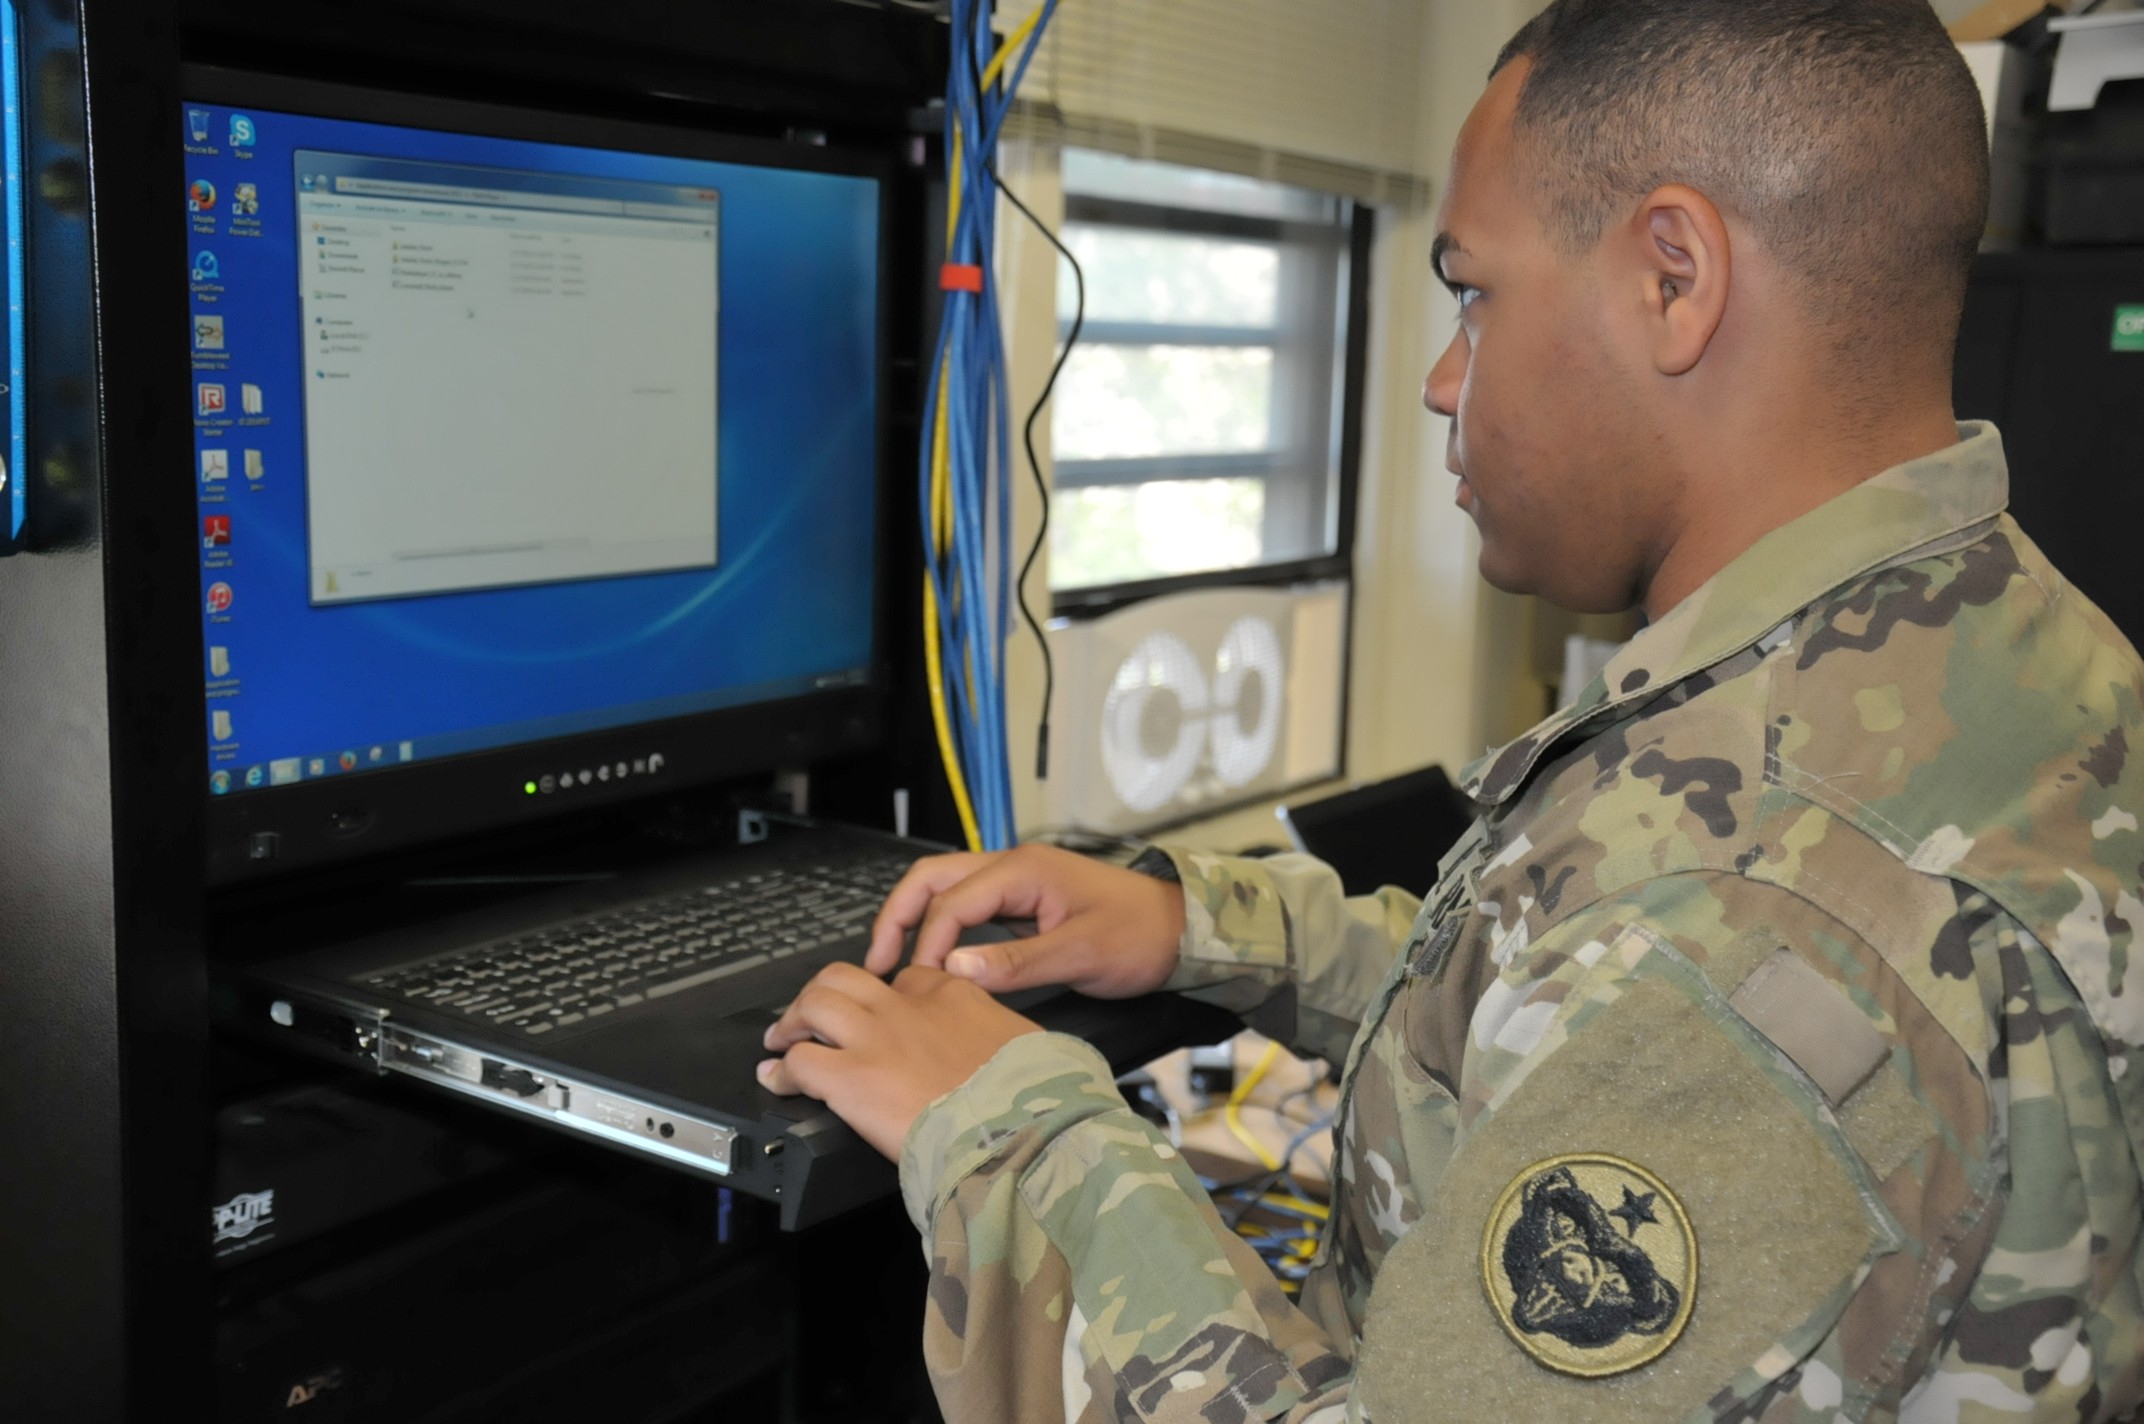 Cyber Awareness is a Team Sport Article The United States Army